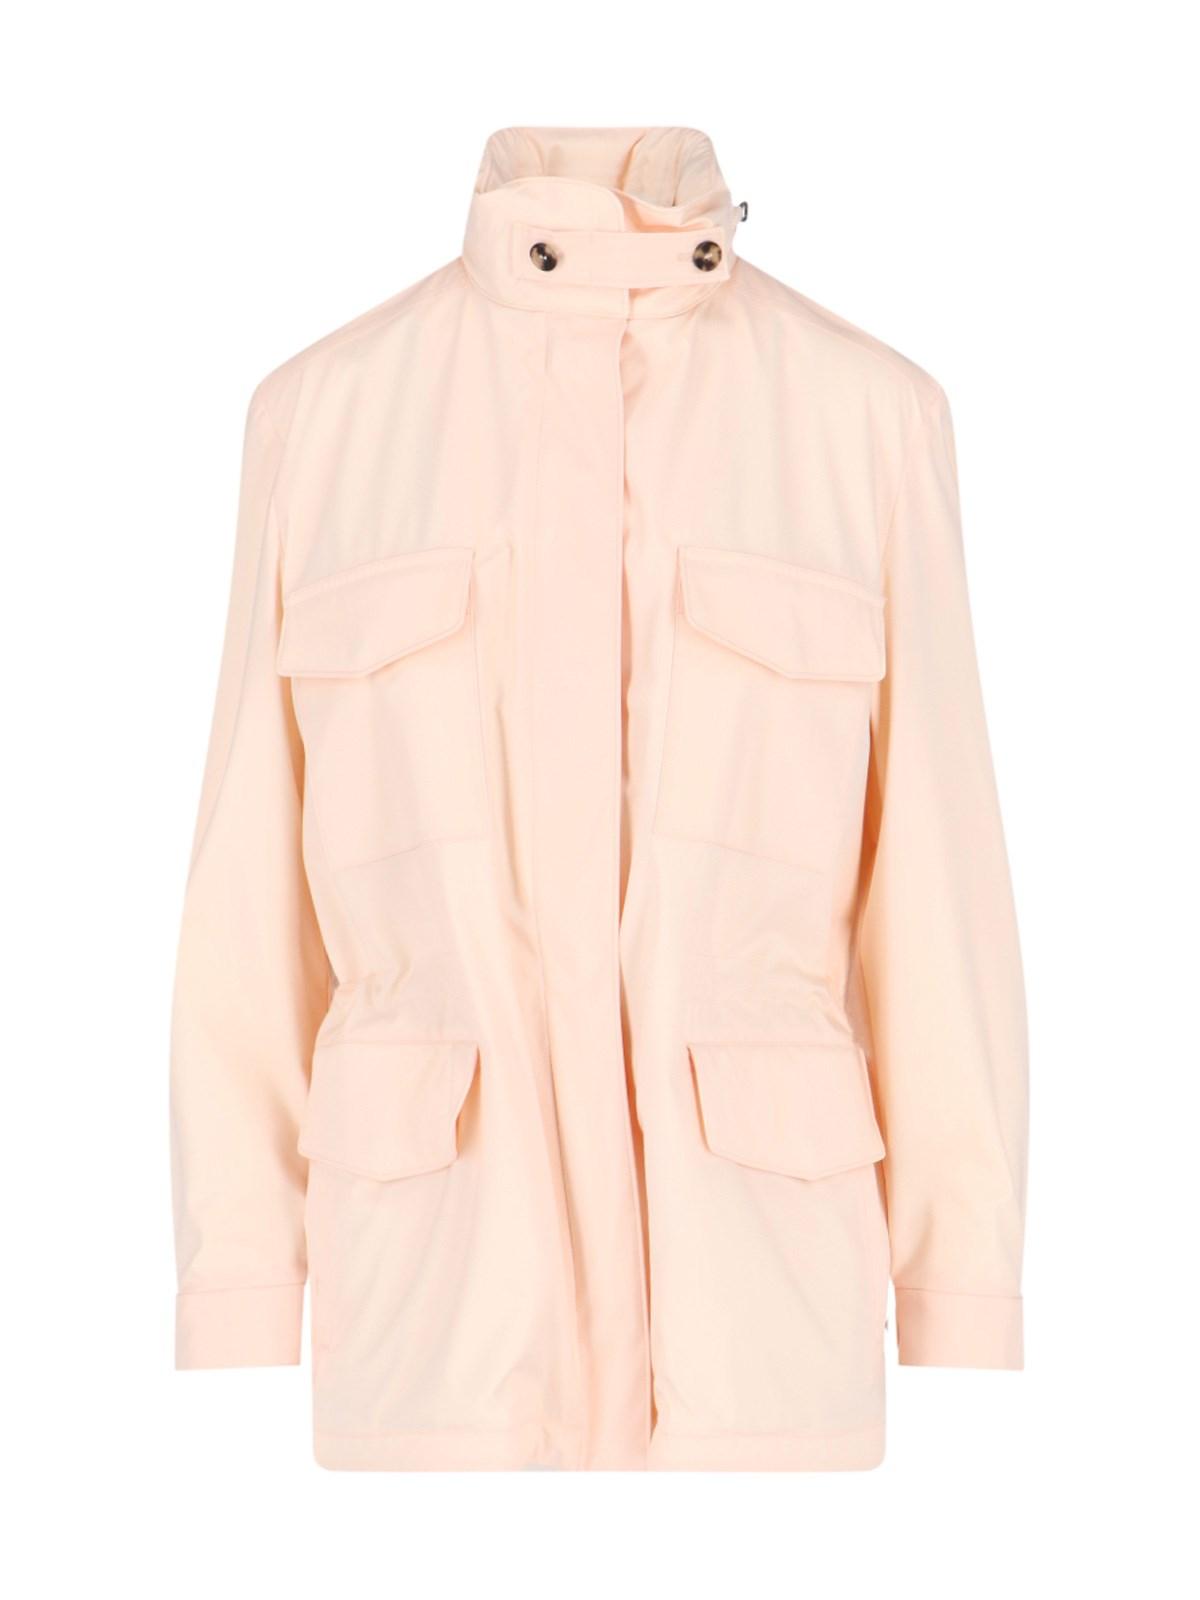 Loro Piana 'iconic Traveller' Jacket in Pink | Lyst